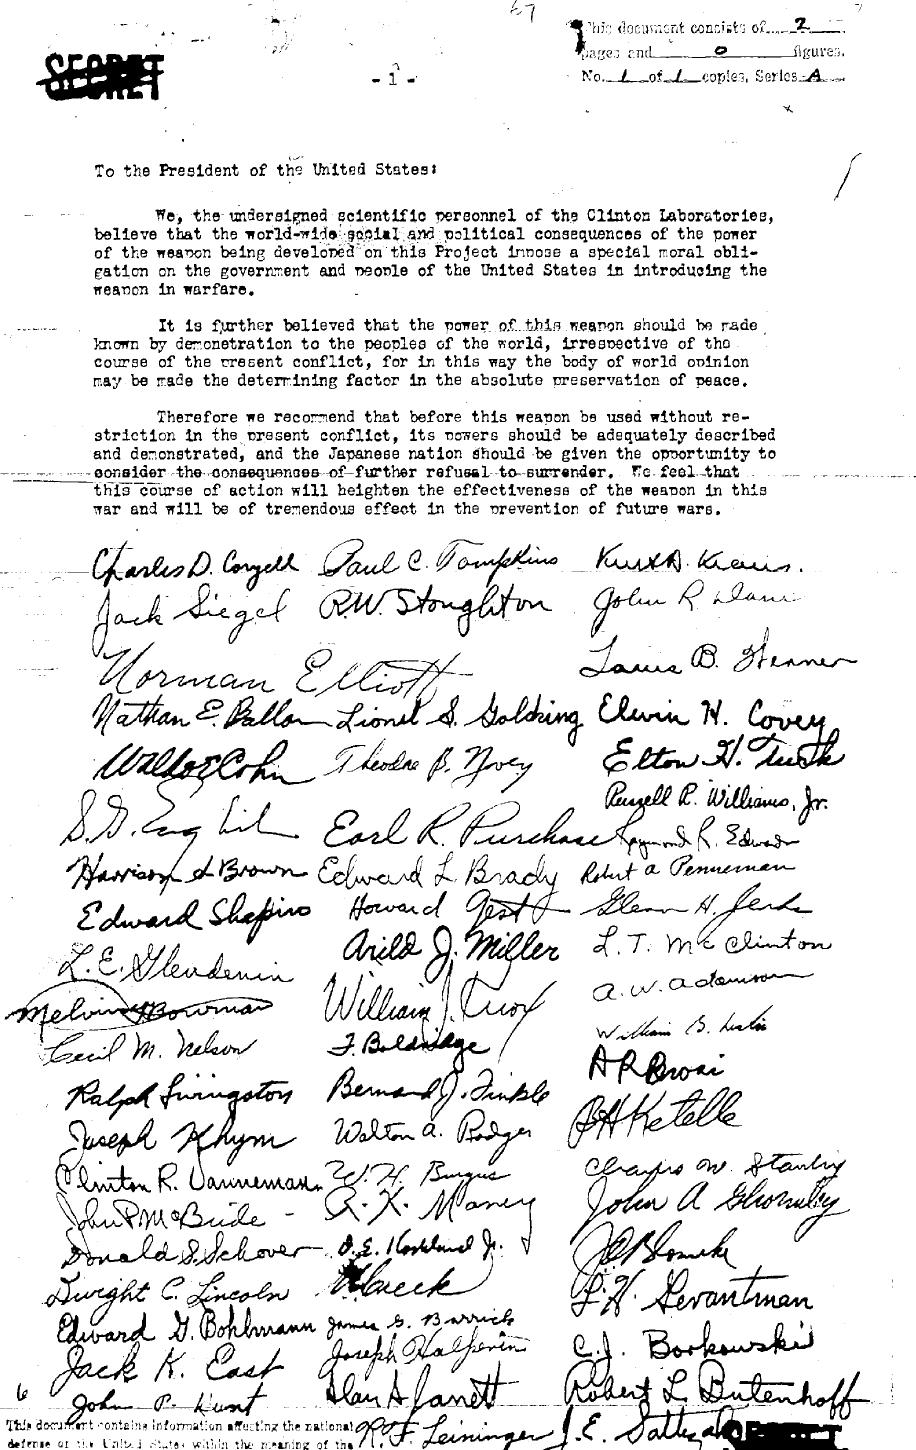 A petition, inspired by Leo Szilard, signed by 70 Manhattan Project scientists calling on the President to not use the bomb before demonstrating and  informing Japan on its power